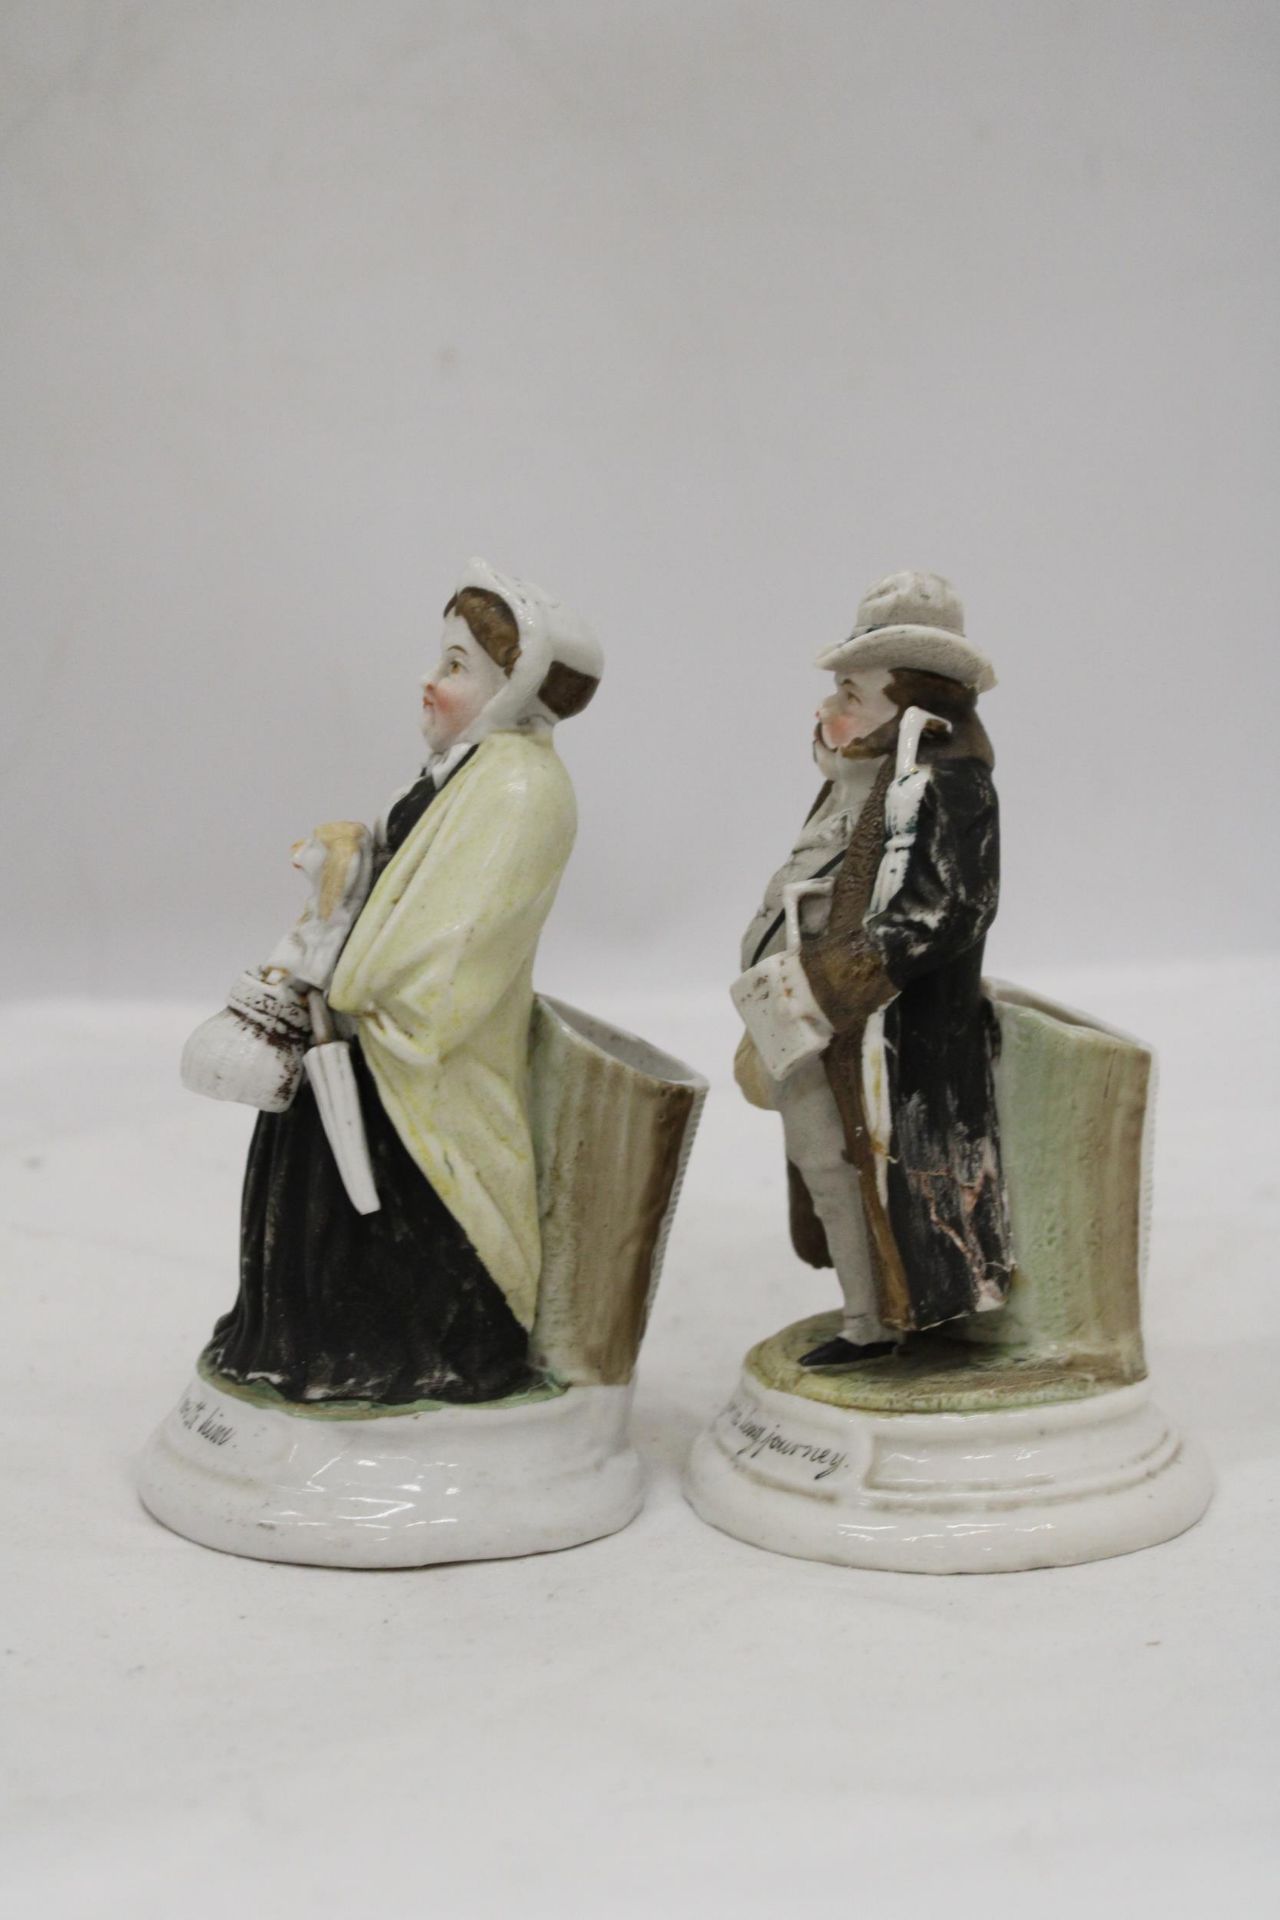 TWO ORIGINAL CONTA AND BOHME GERMAN FAIRINGS MATCHSTICK HOLDERS, 'I AM STARTING FOR A LONG JOURNEY', - Image 5 of 6